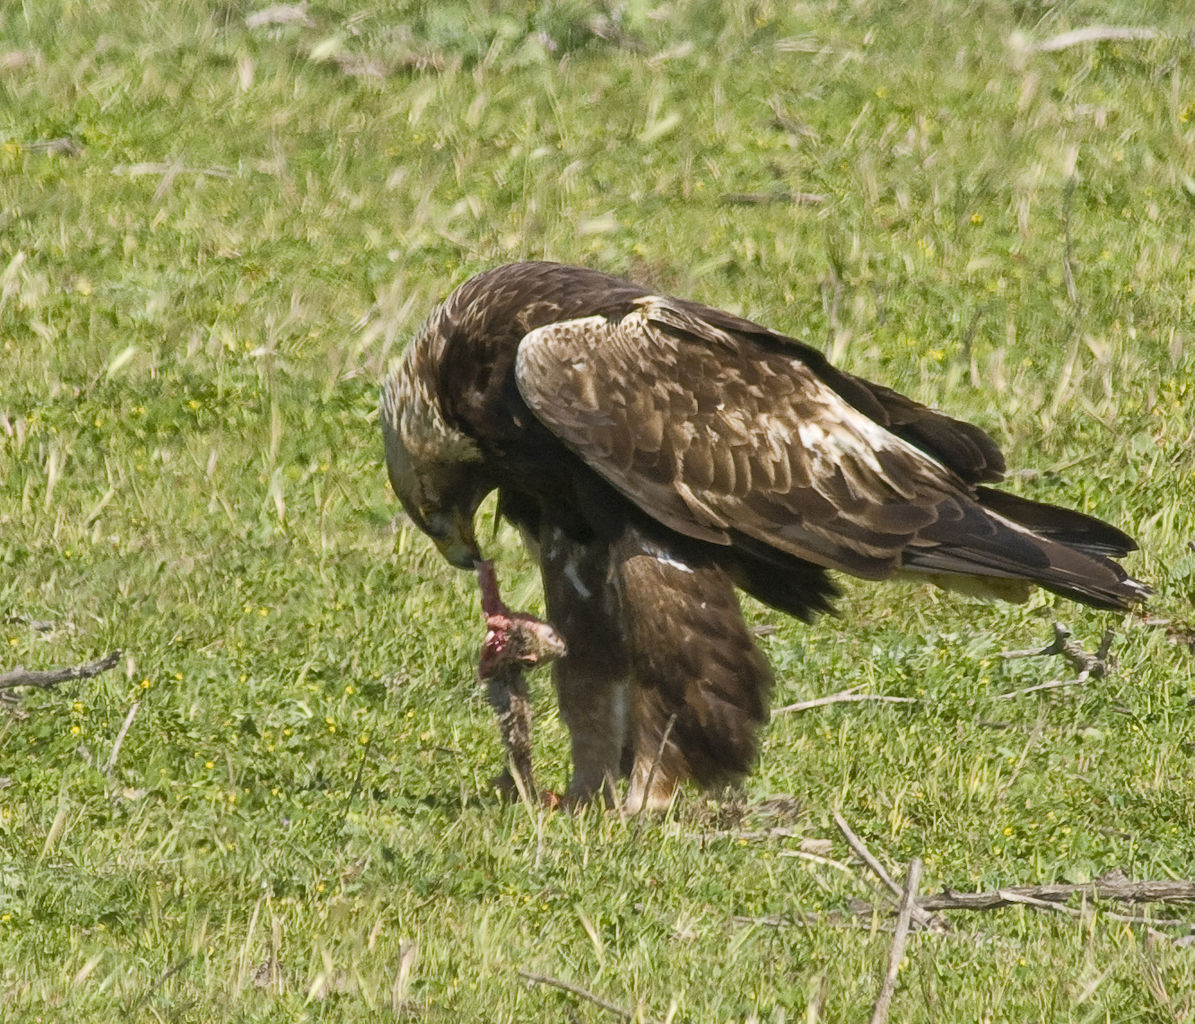 Golden eagle with prey